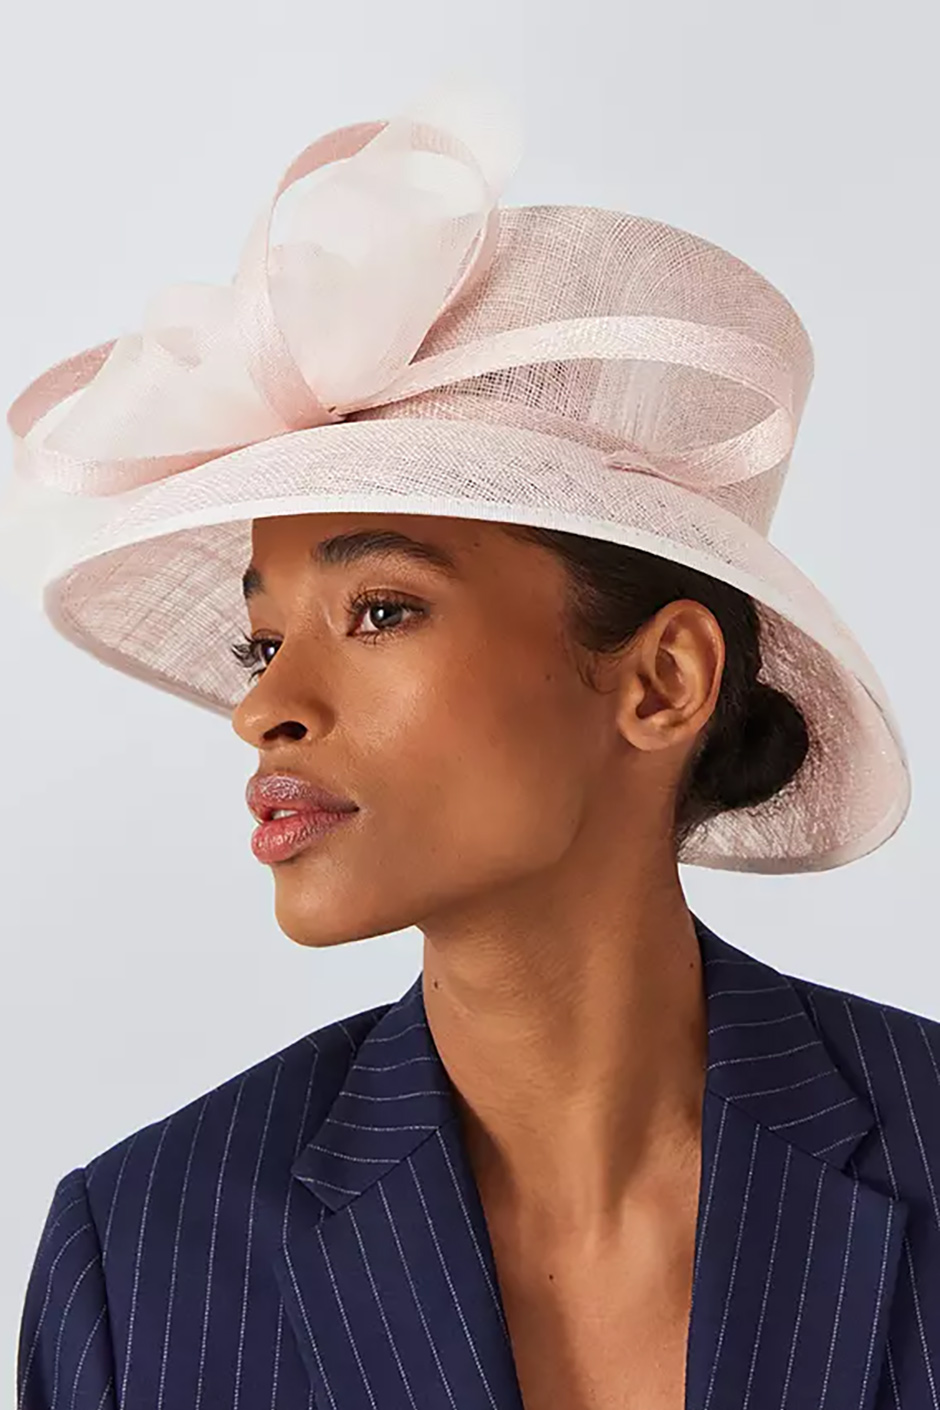 John Lewis wedding hat in pink with oversized bow